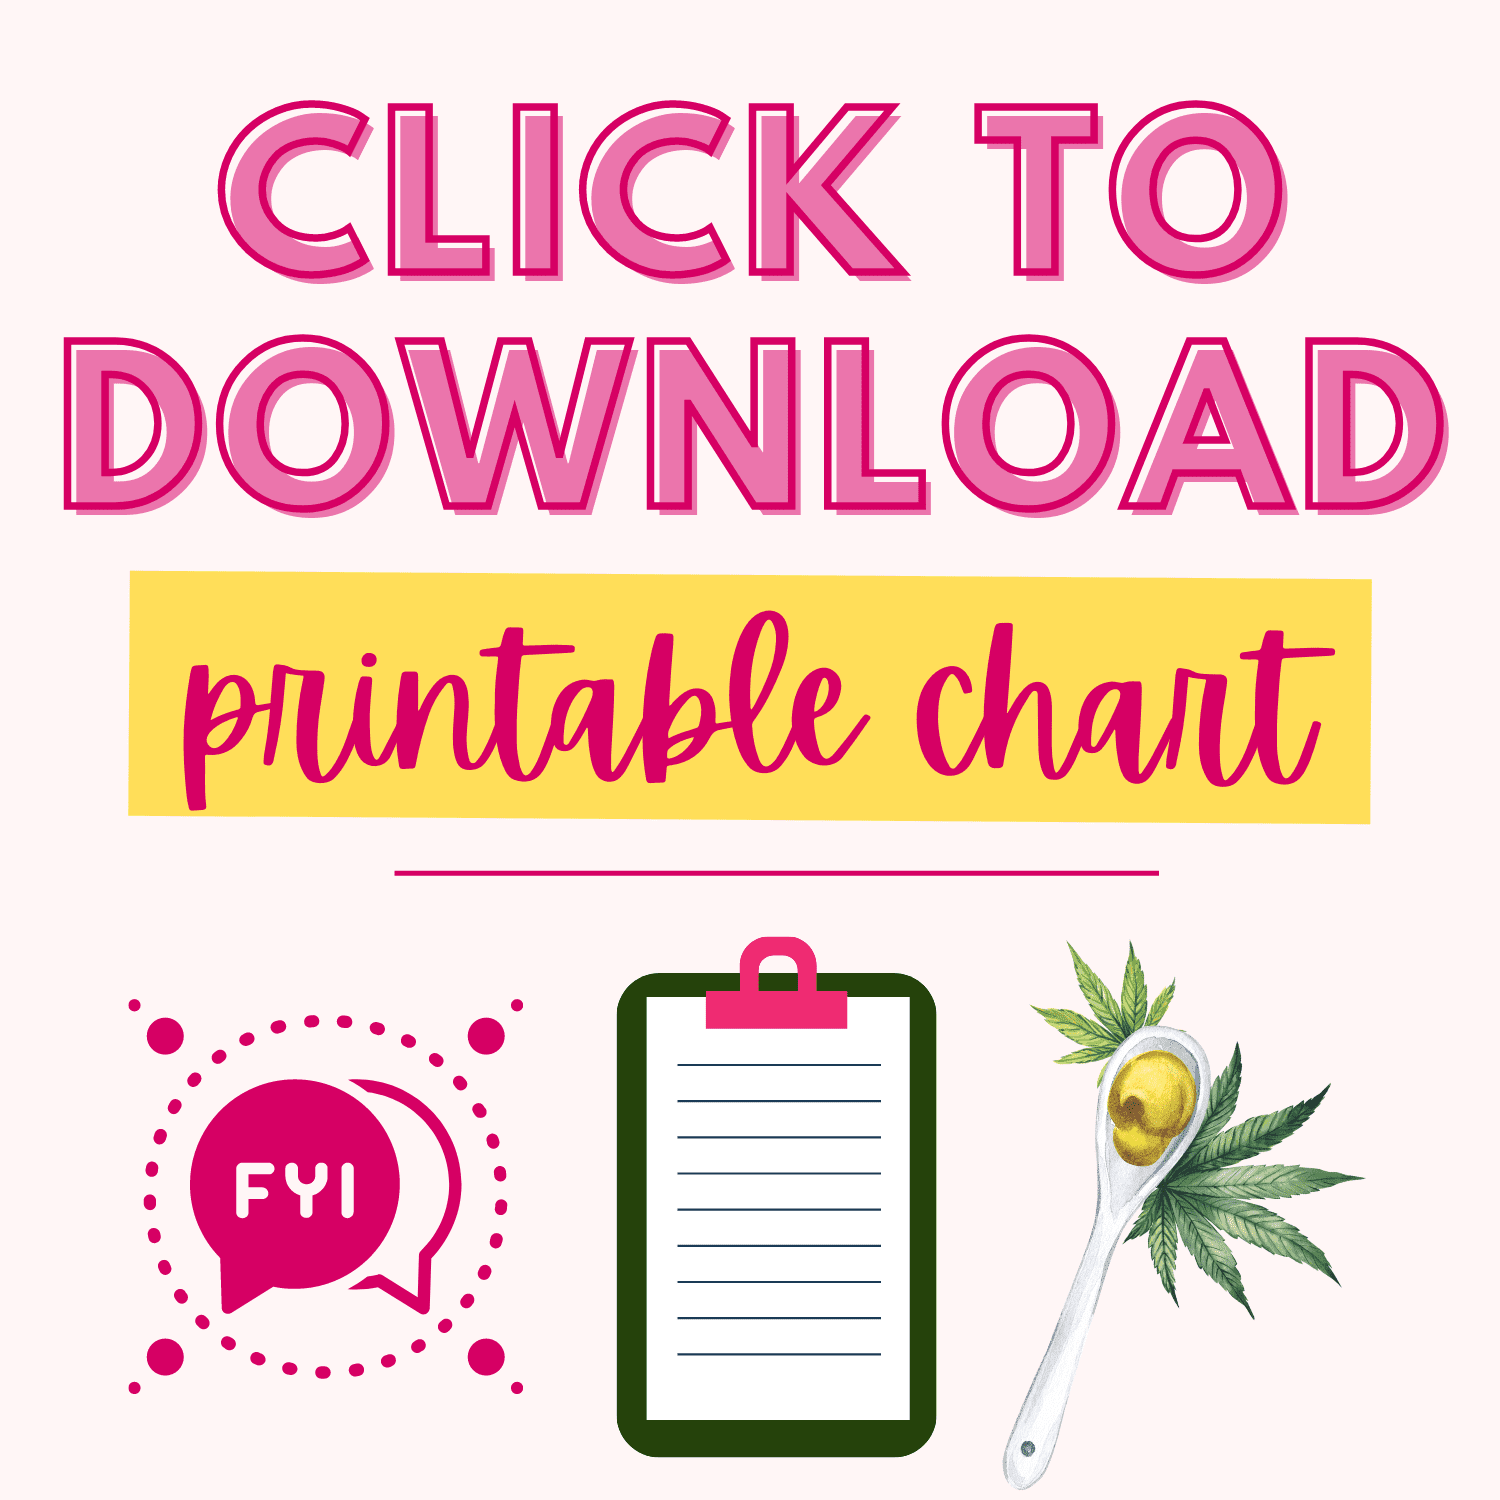 Click to download the printable chart